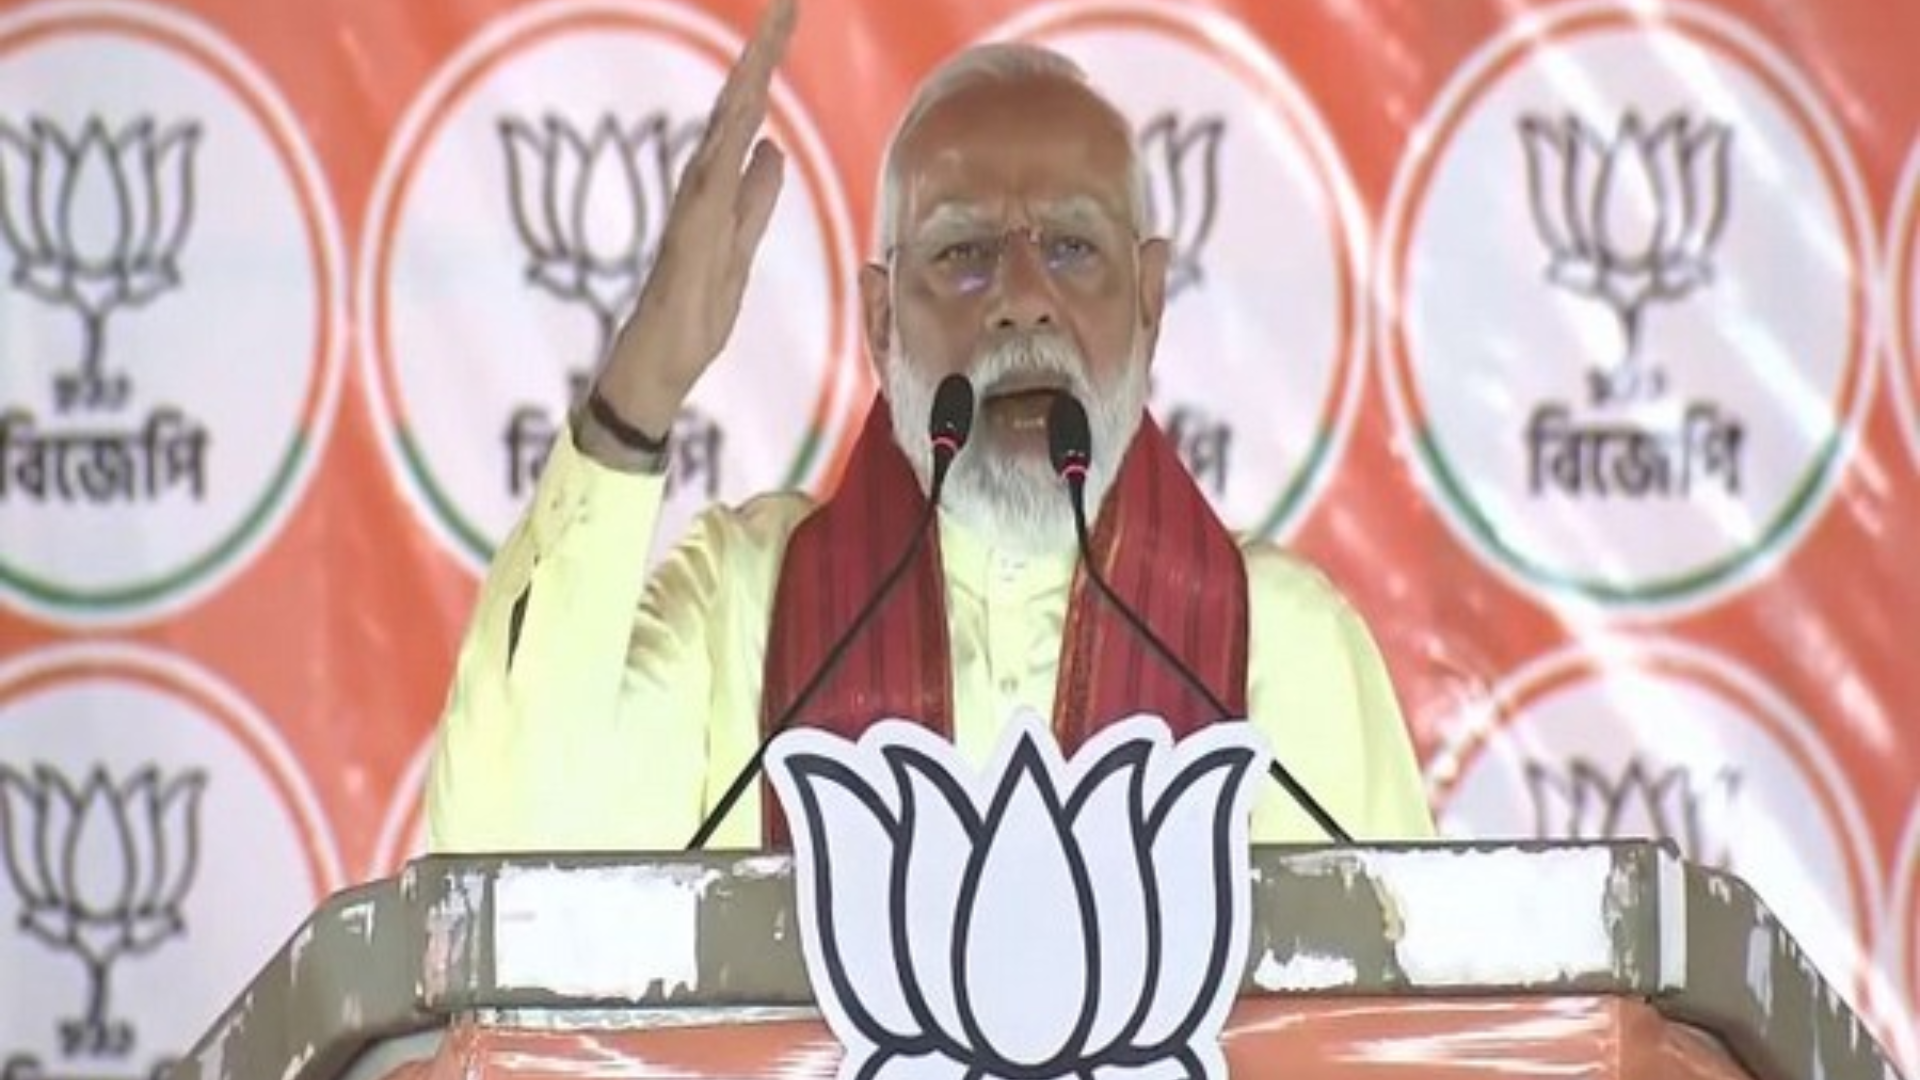 PM Modi Optimistic for BJP’s Stronger Victory in West Bengal, Slams Congress and TMC Policies During Public Rally in Barrackpore